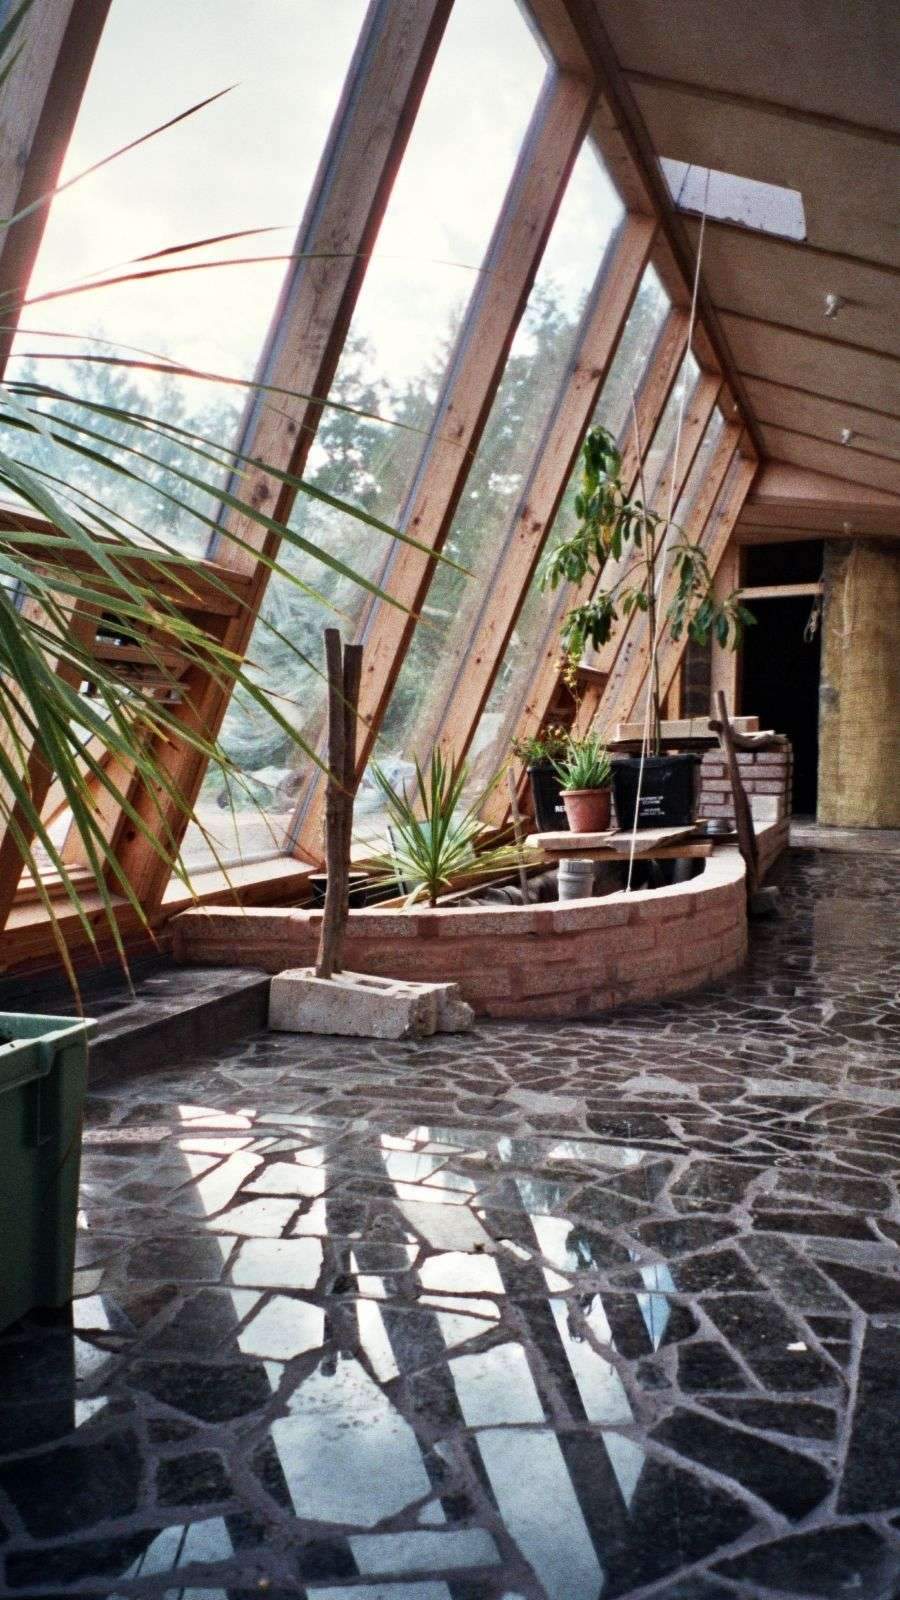 Earthship homes were created in the 1970s by Mike Reynolds, the founder of Earthship…